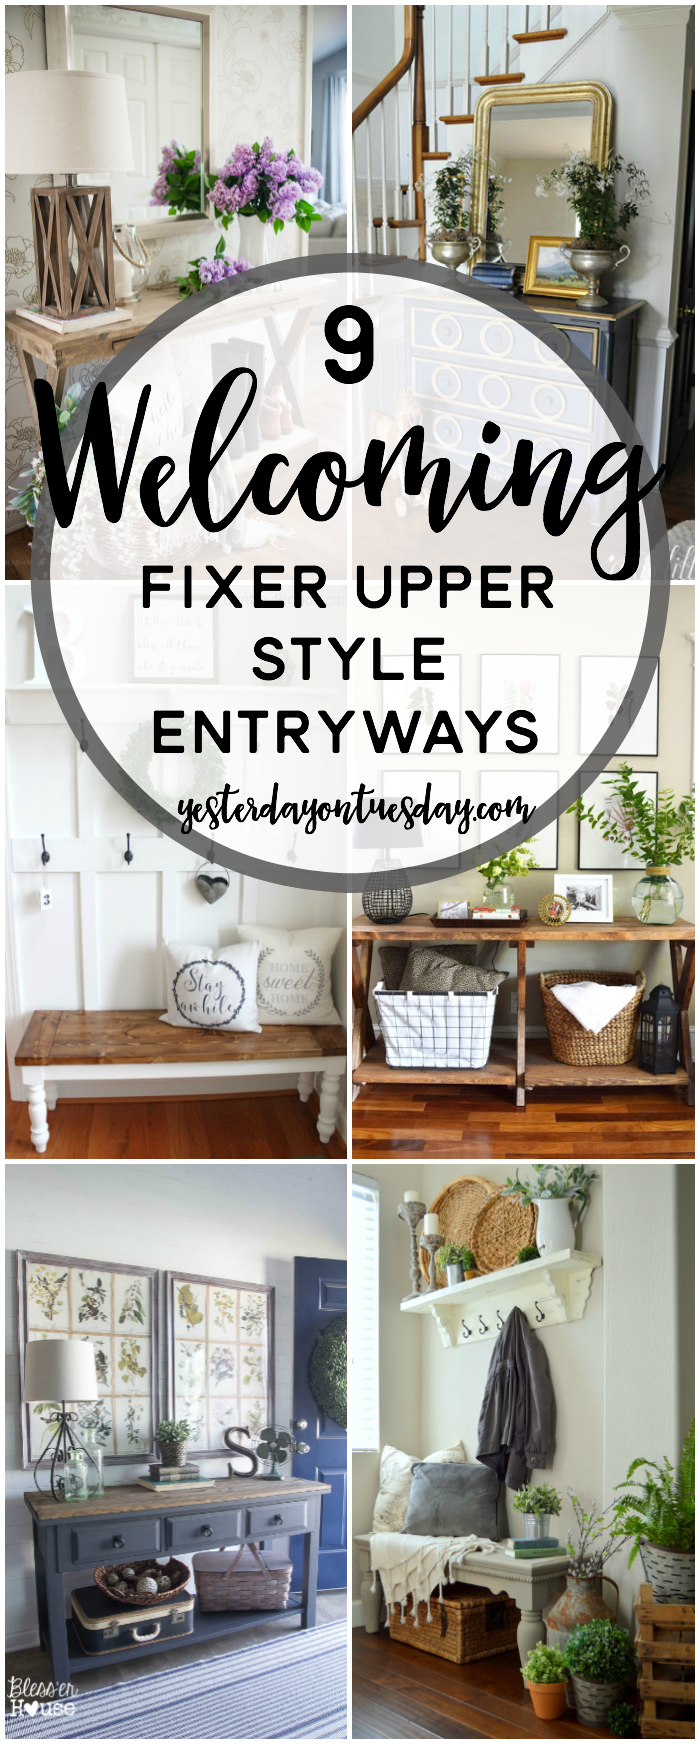 9 Welcoming Fixer Upper Style Entryways: Great ideas for creating a warm and inviting entryway for your home. Fixer Upper Style with a dash of luxe, rustic, country and more!